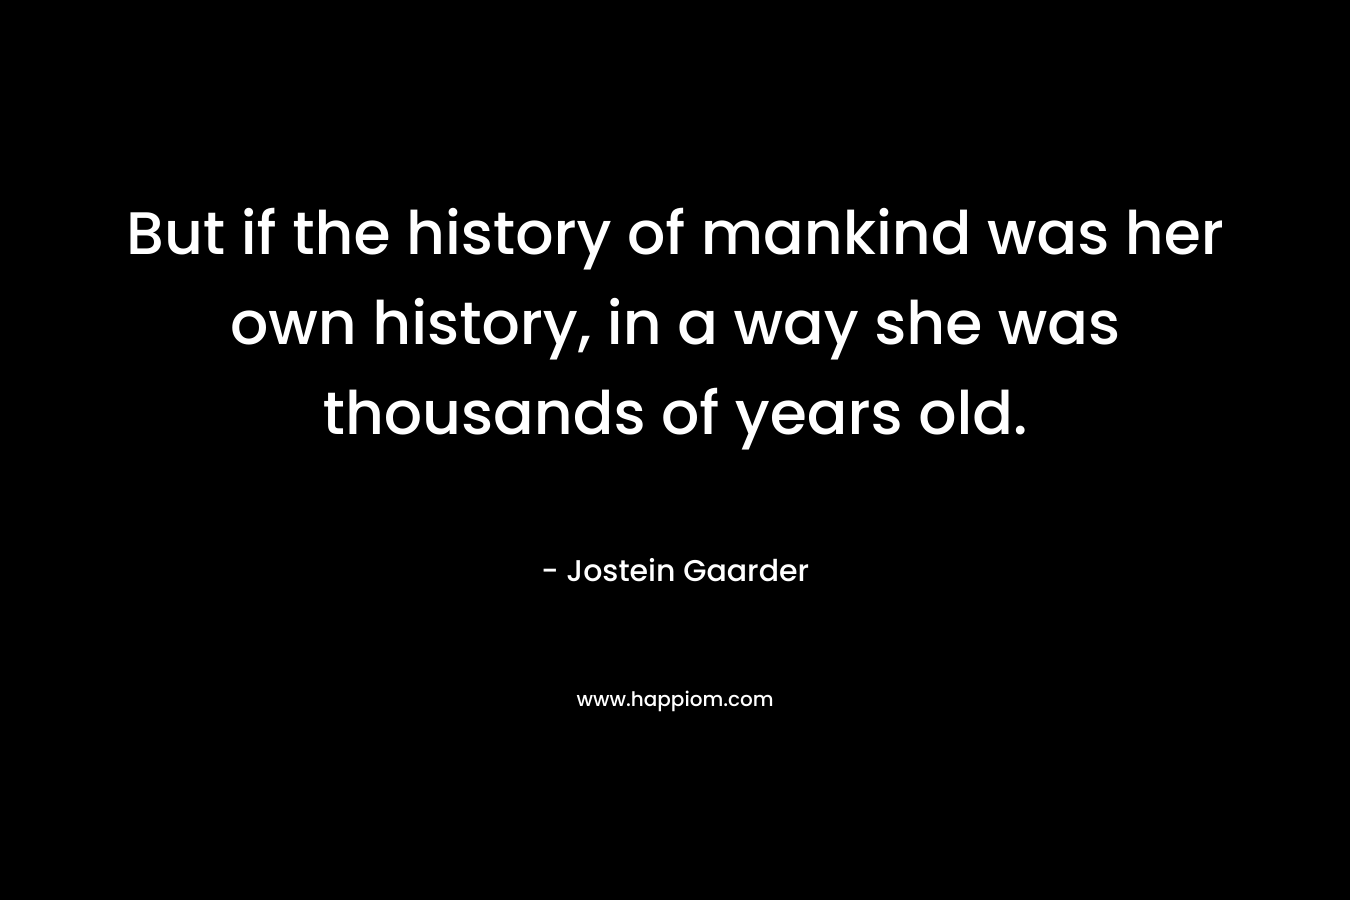 But if the history of mankind was her own history, in a way she was thousands of years old. – Jostein Gaarder